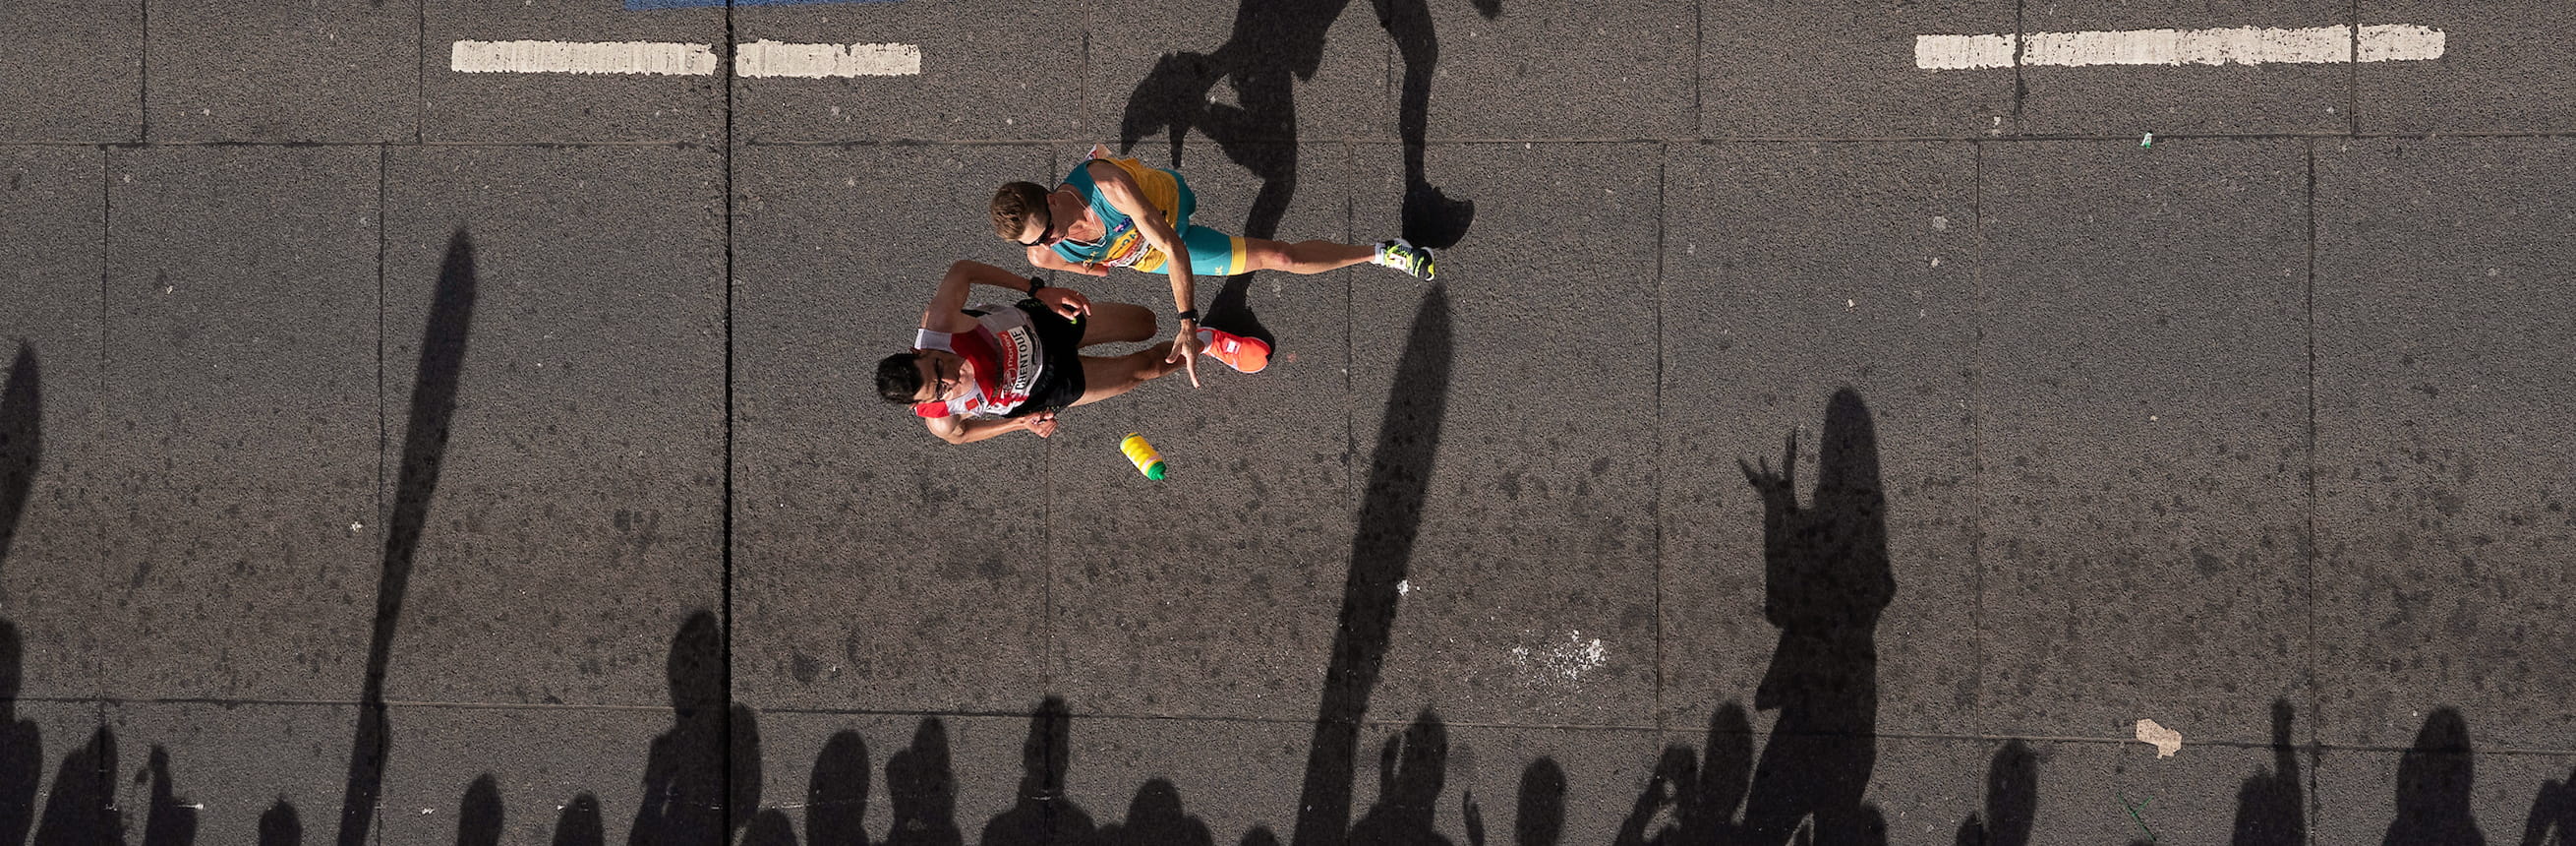 Michael Roeger AUS throws a drinks bottle to a volunteer during the T46 Men World Para Athletics Marathon Championships